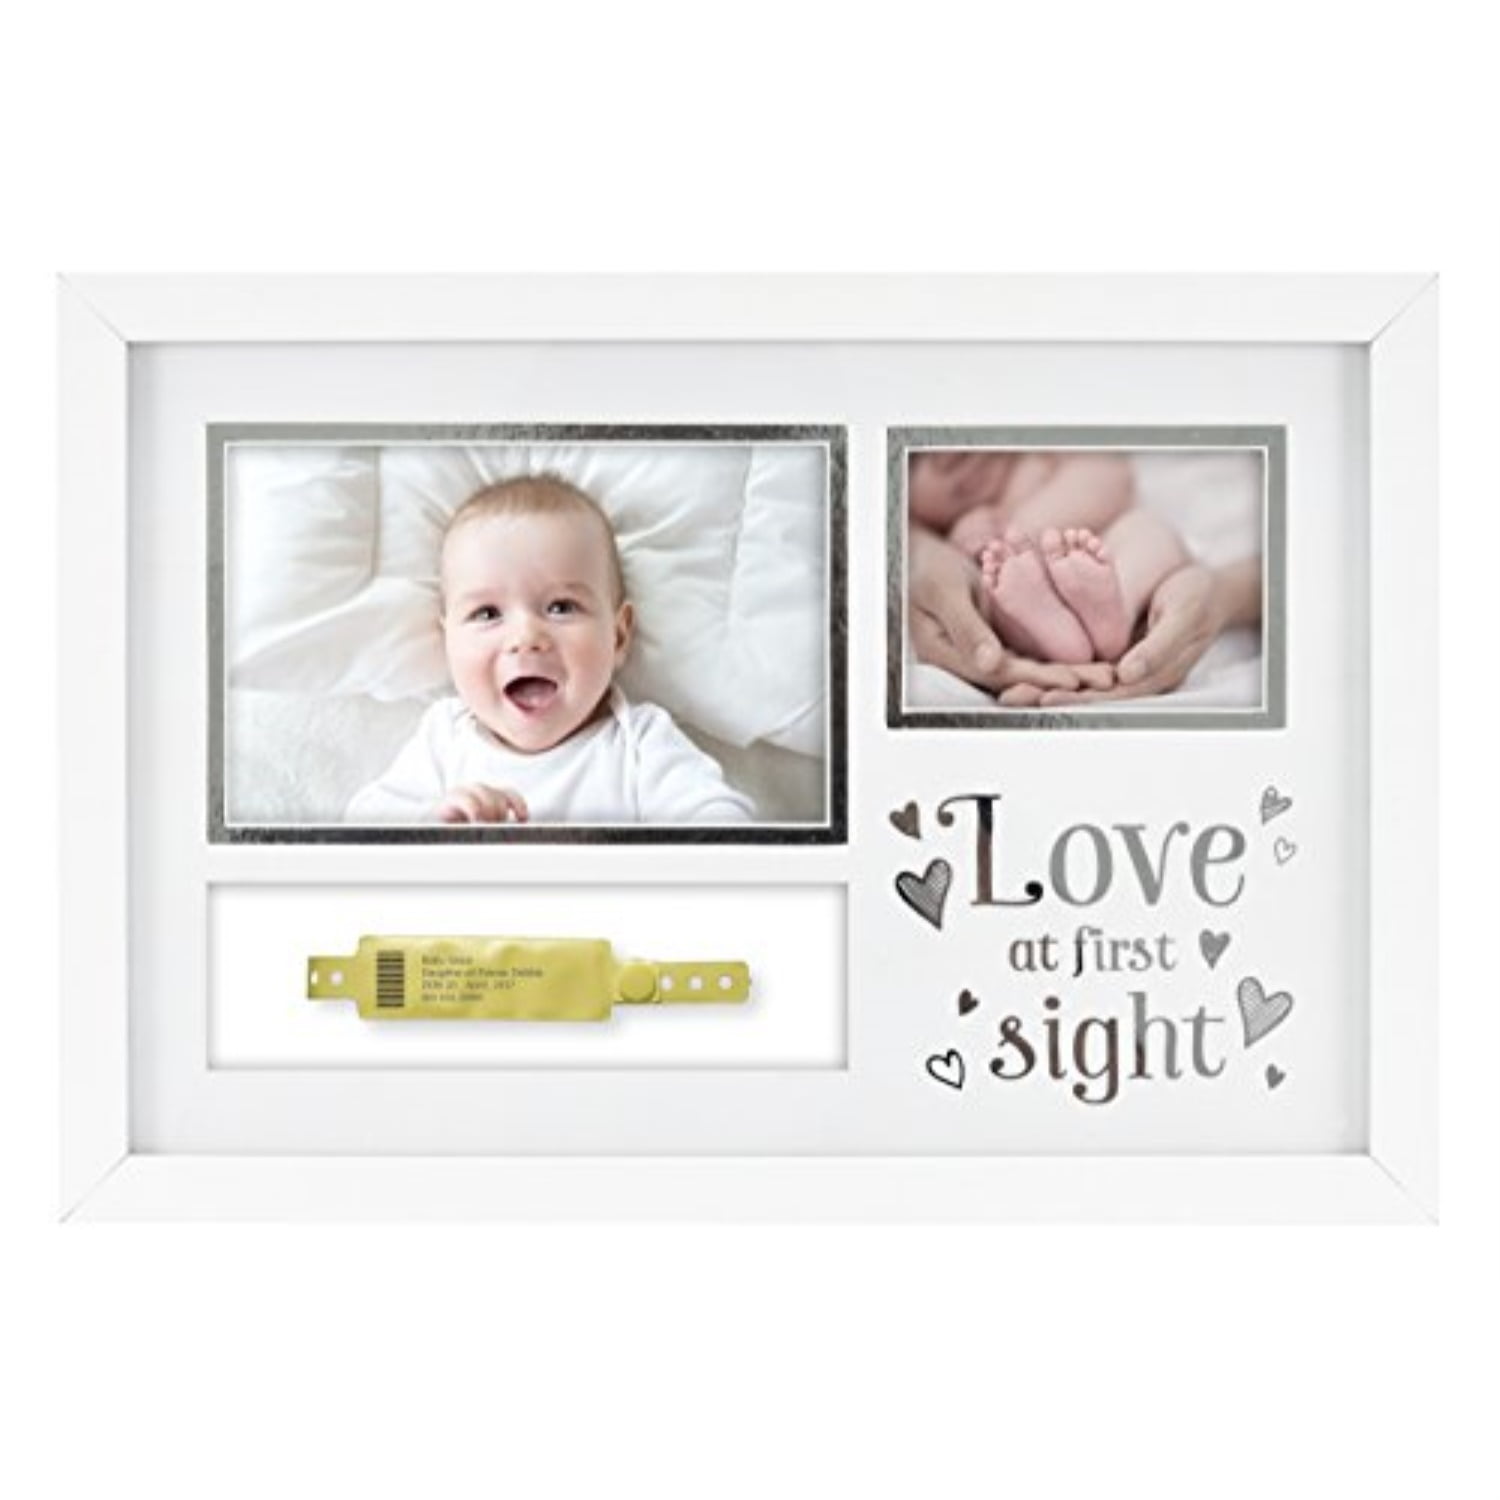 Daughter I Love You Amber 4 x 6 Mother Of Pearl Photo Frame 